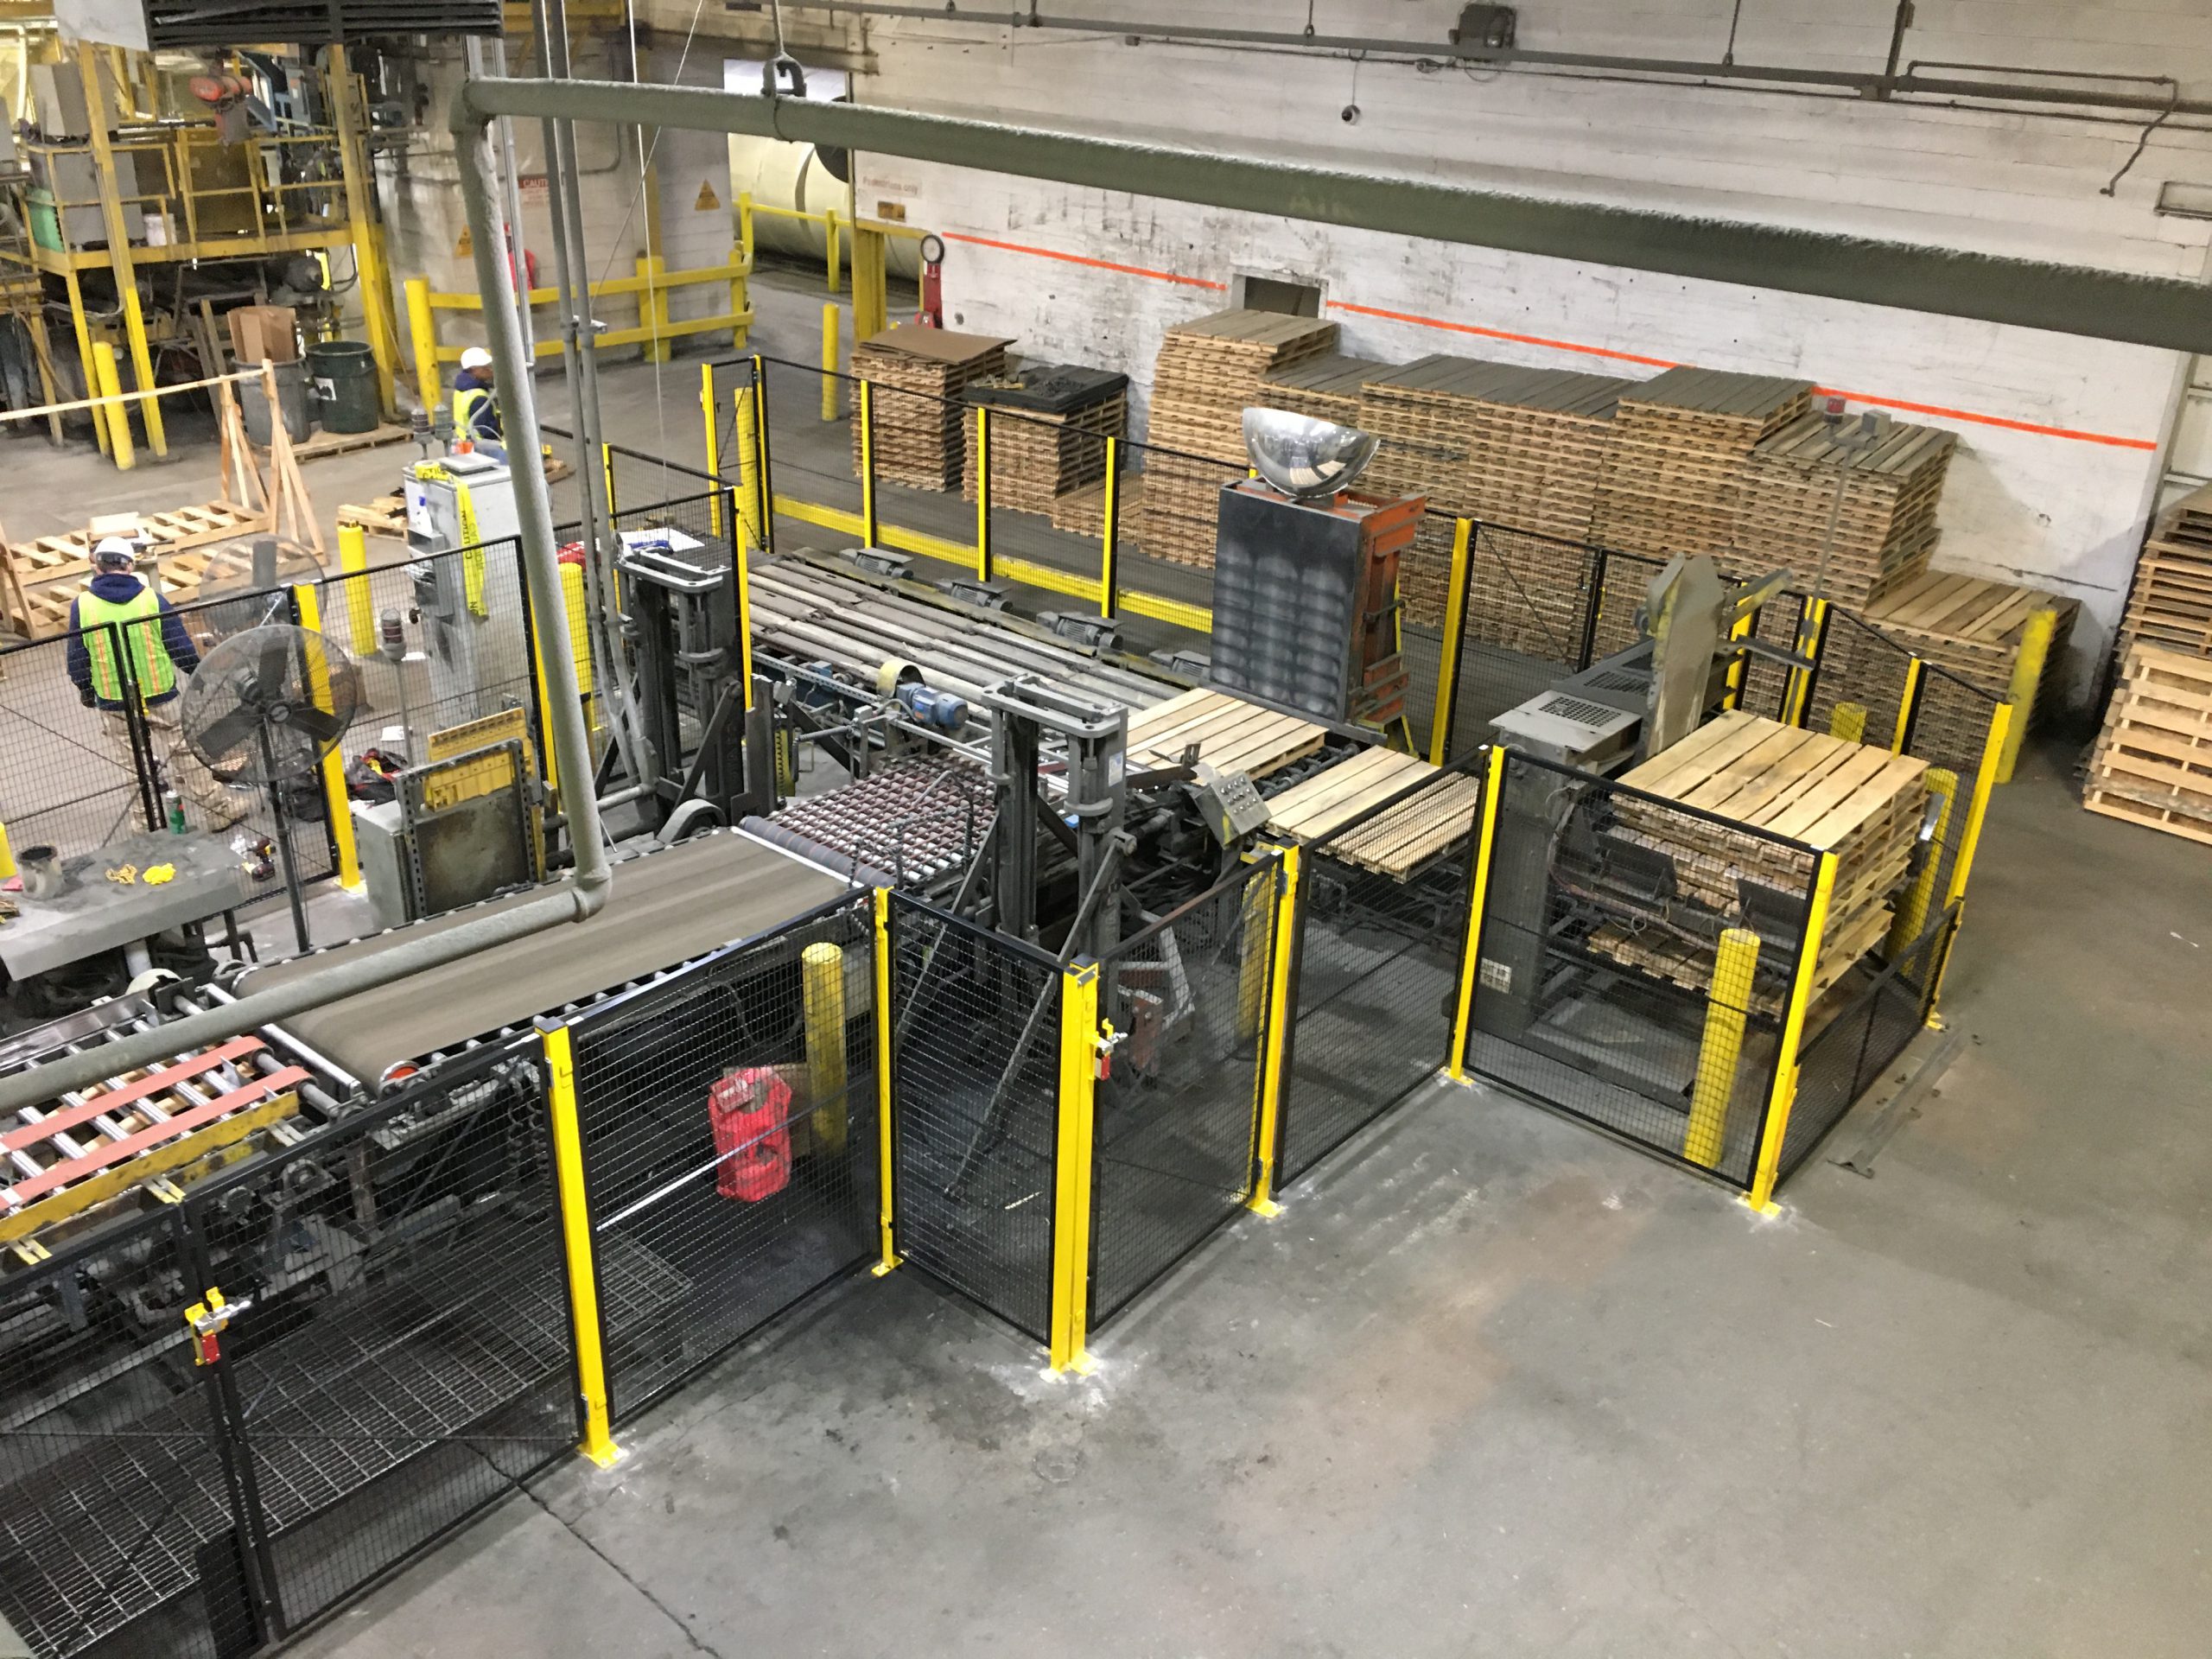 wirecrafters machine guarding production line safety